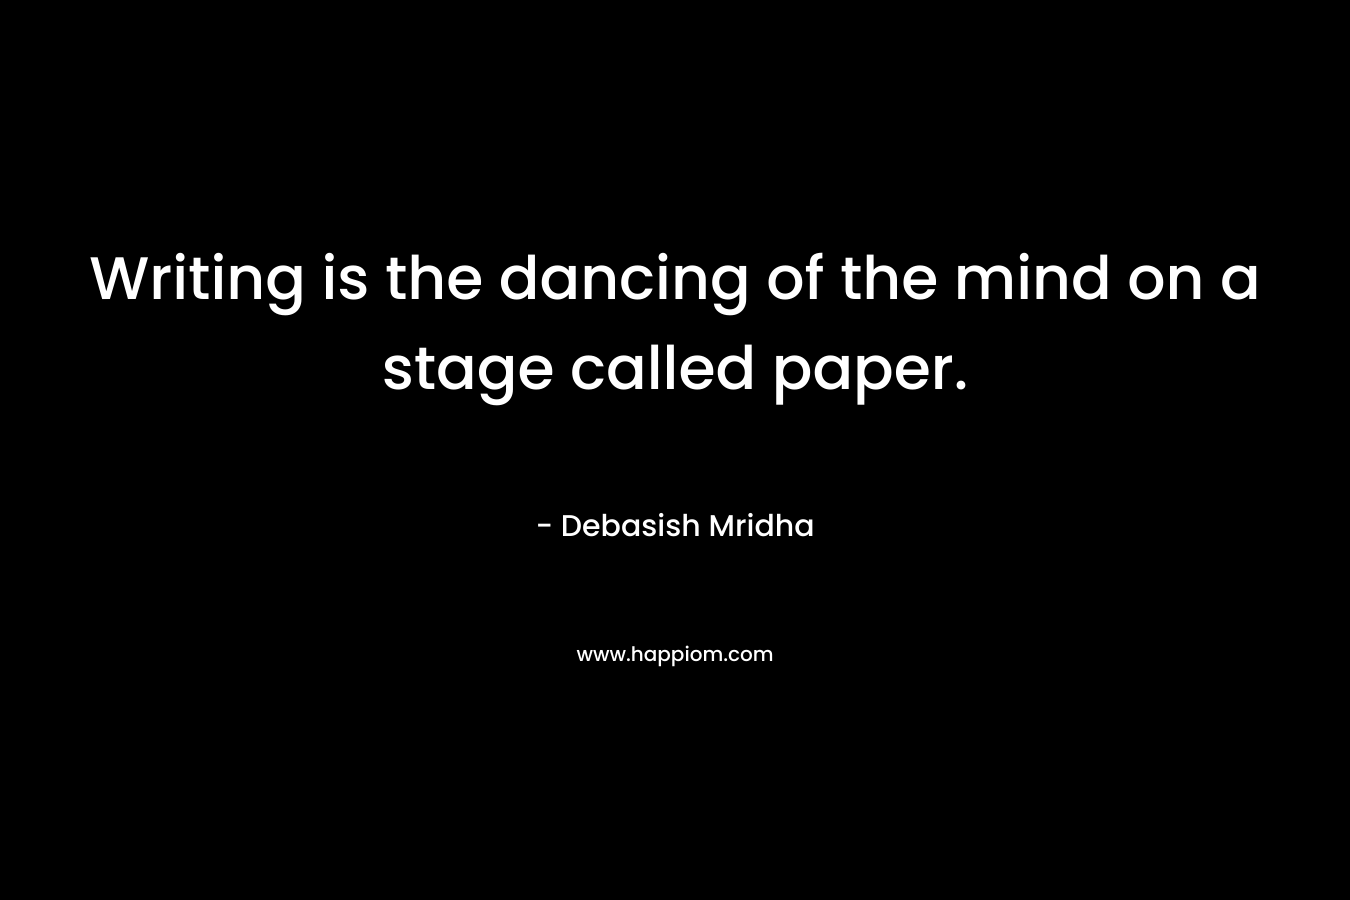 Writing is the dancing of the mind on a stage called paper.